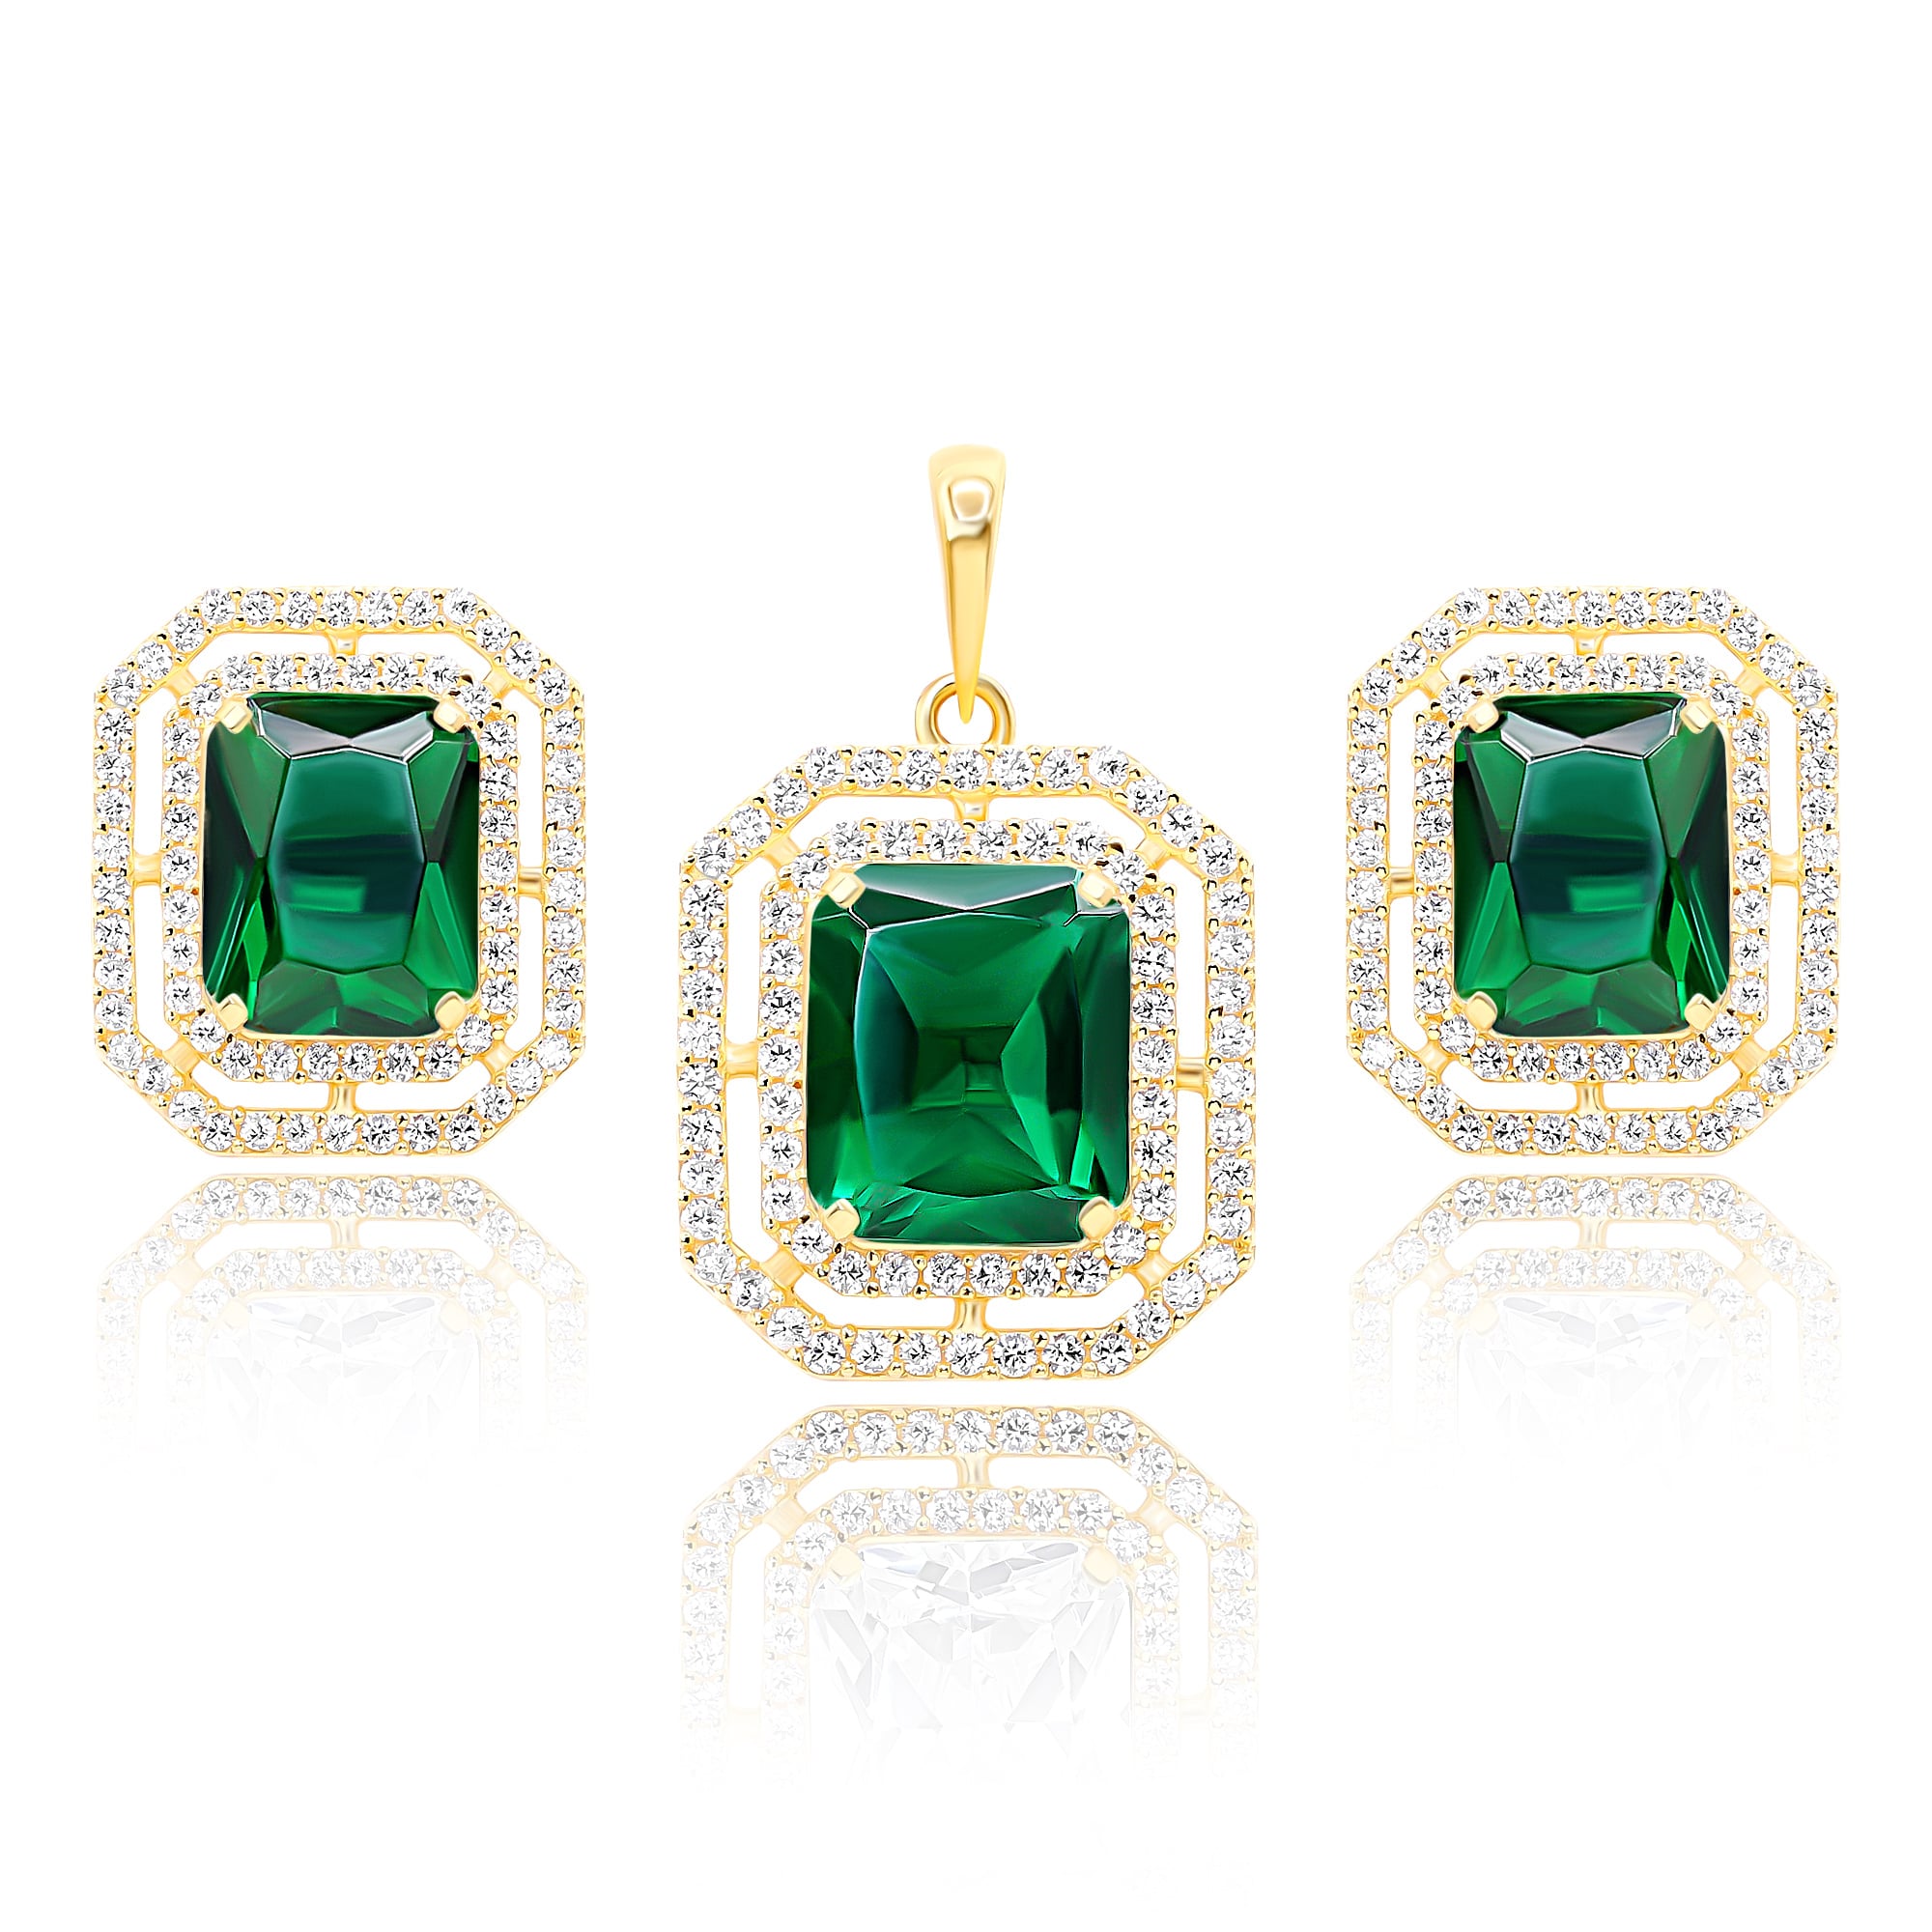 22K Gold Emerald CZ Pendant Set And Ring